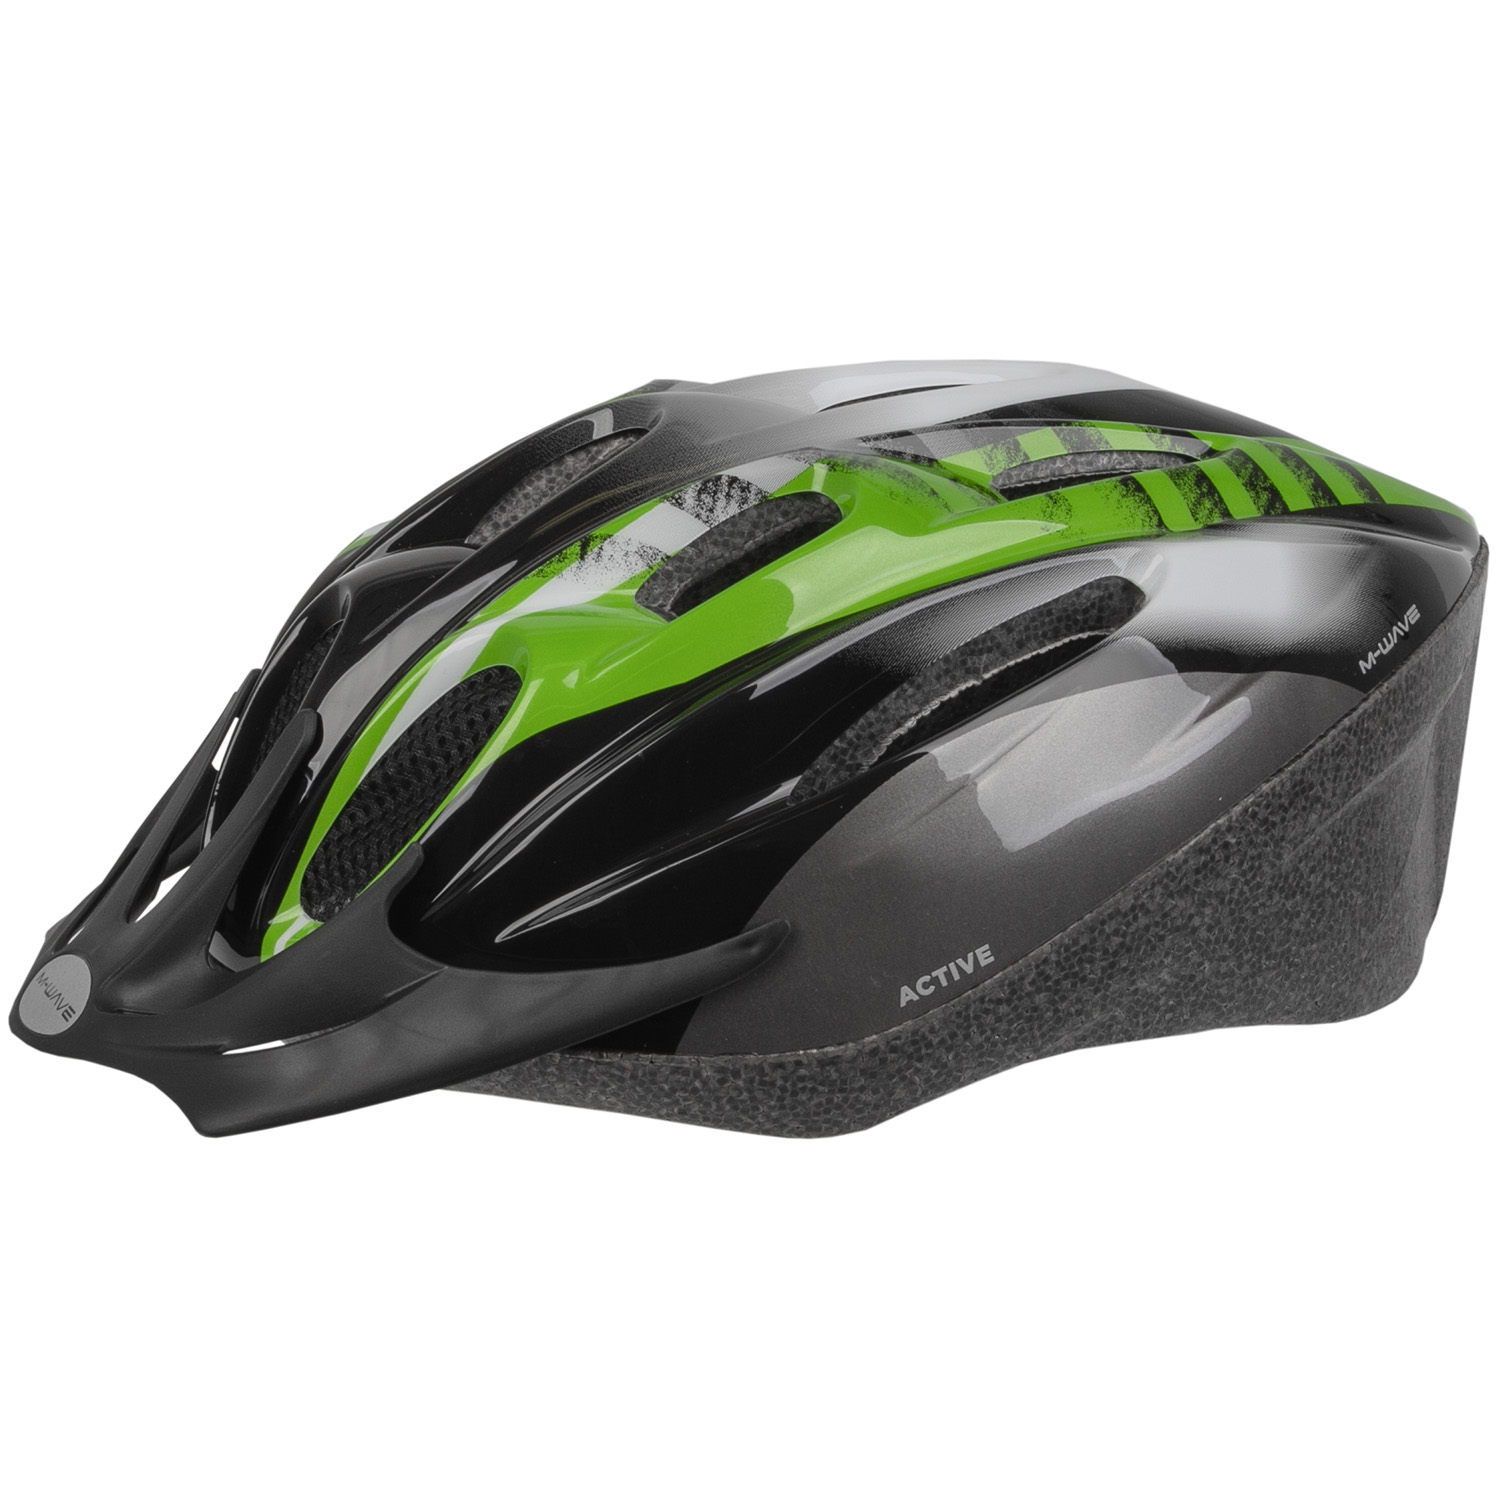 731037 M-WAVE Active Mamba bicycle helmet – AVAILABLE IN SELECTED BIKE SHOP